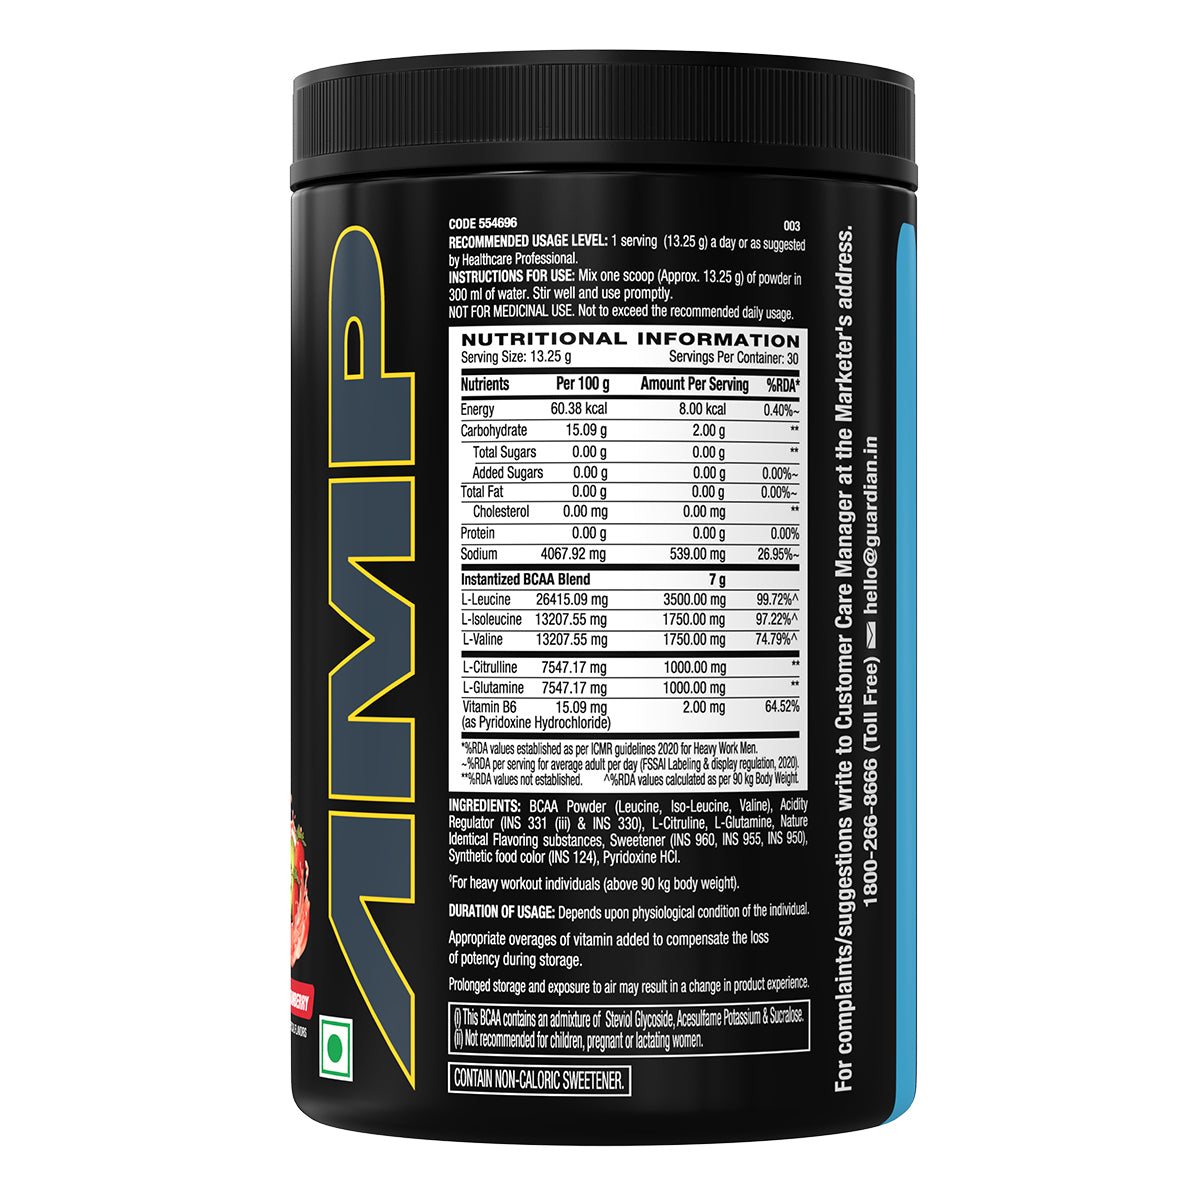 Complete Workout Stack For Advanced - Maximizes Lean Muscle Gains | Promotes Muscle Building  | Improves Mental Focus & Energy